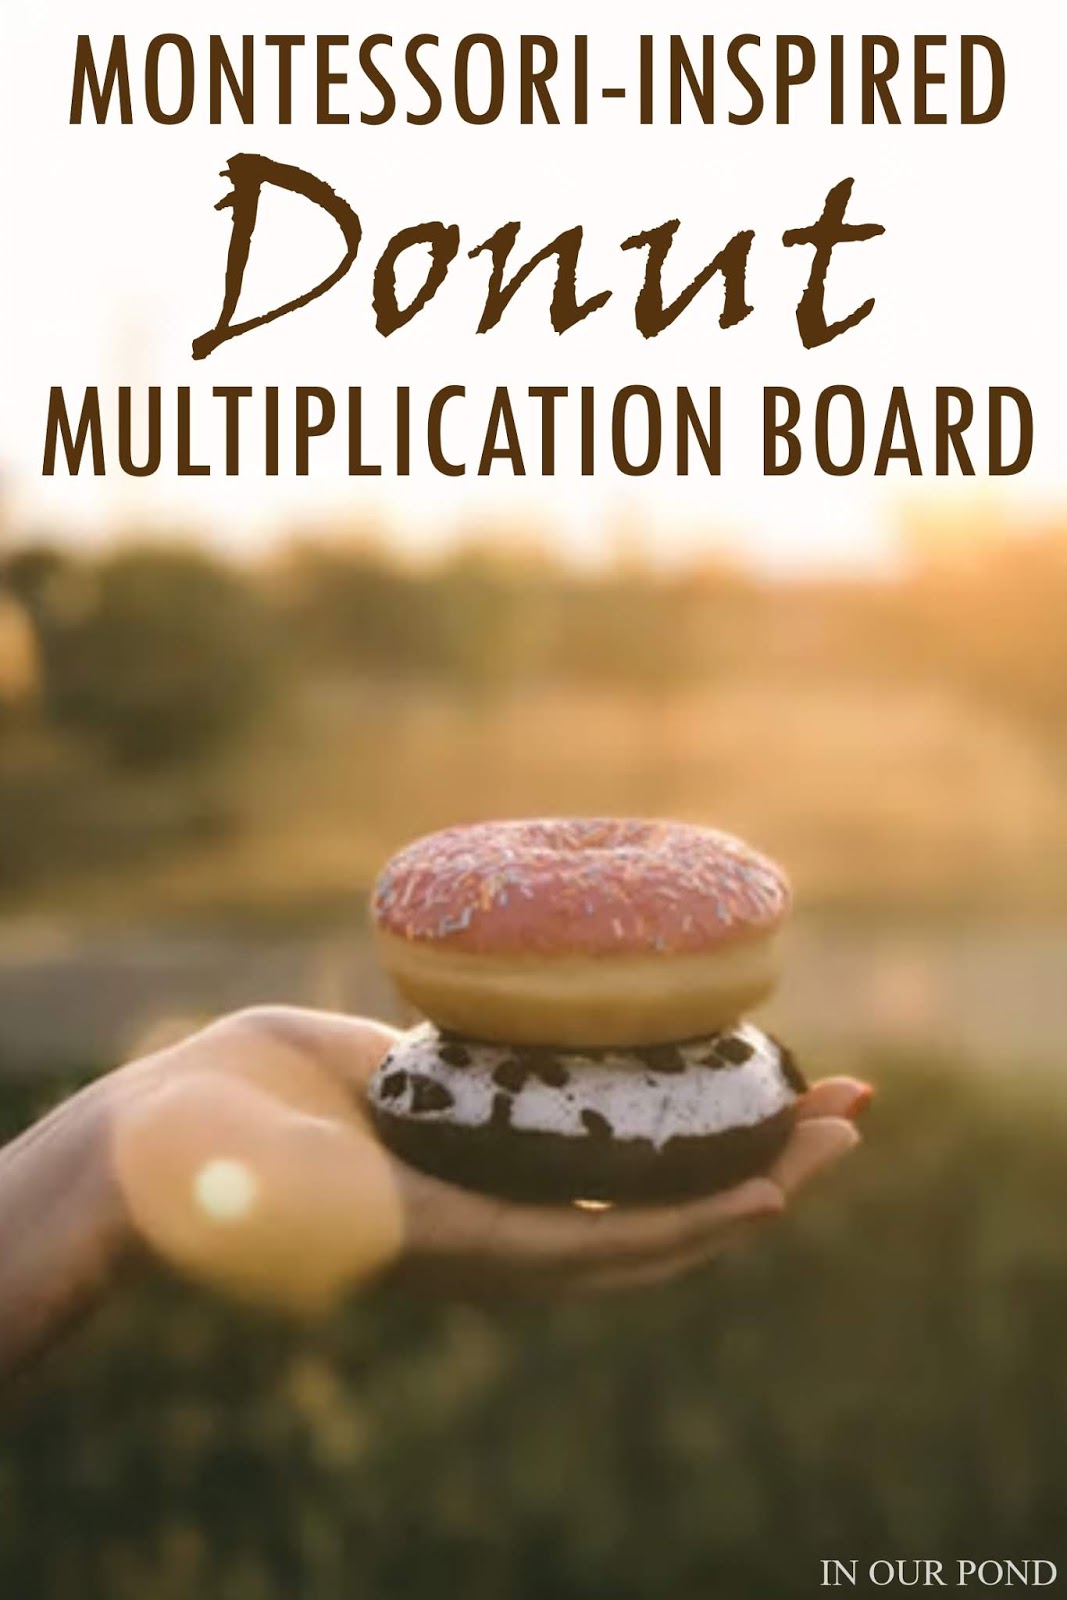 montessori-inspired-multiplication-board-with-donuts